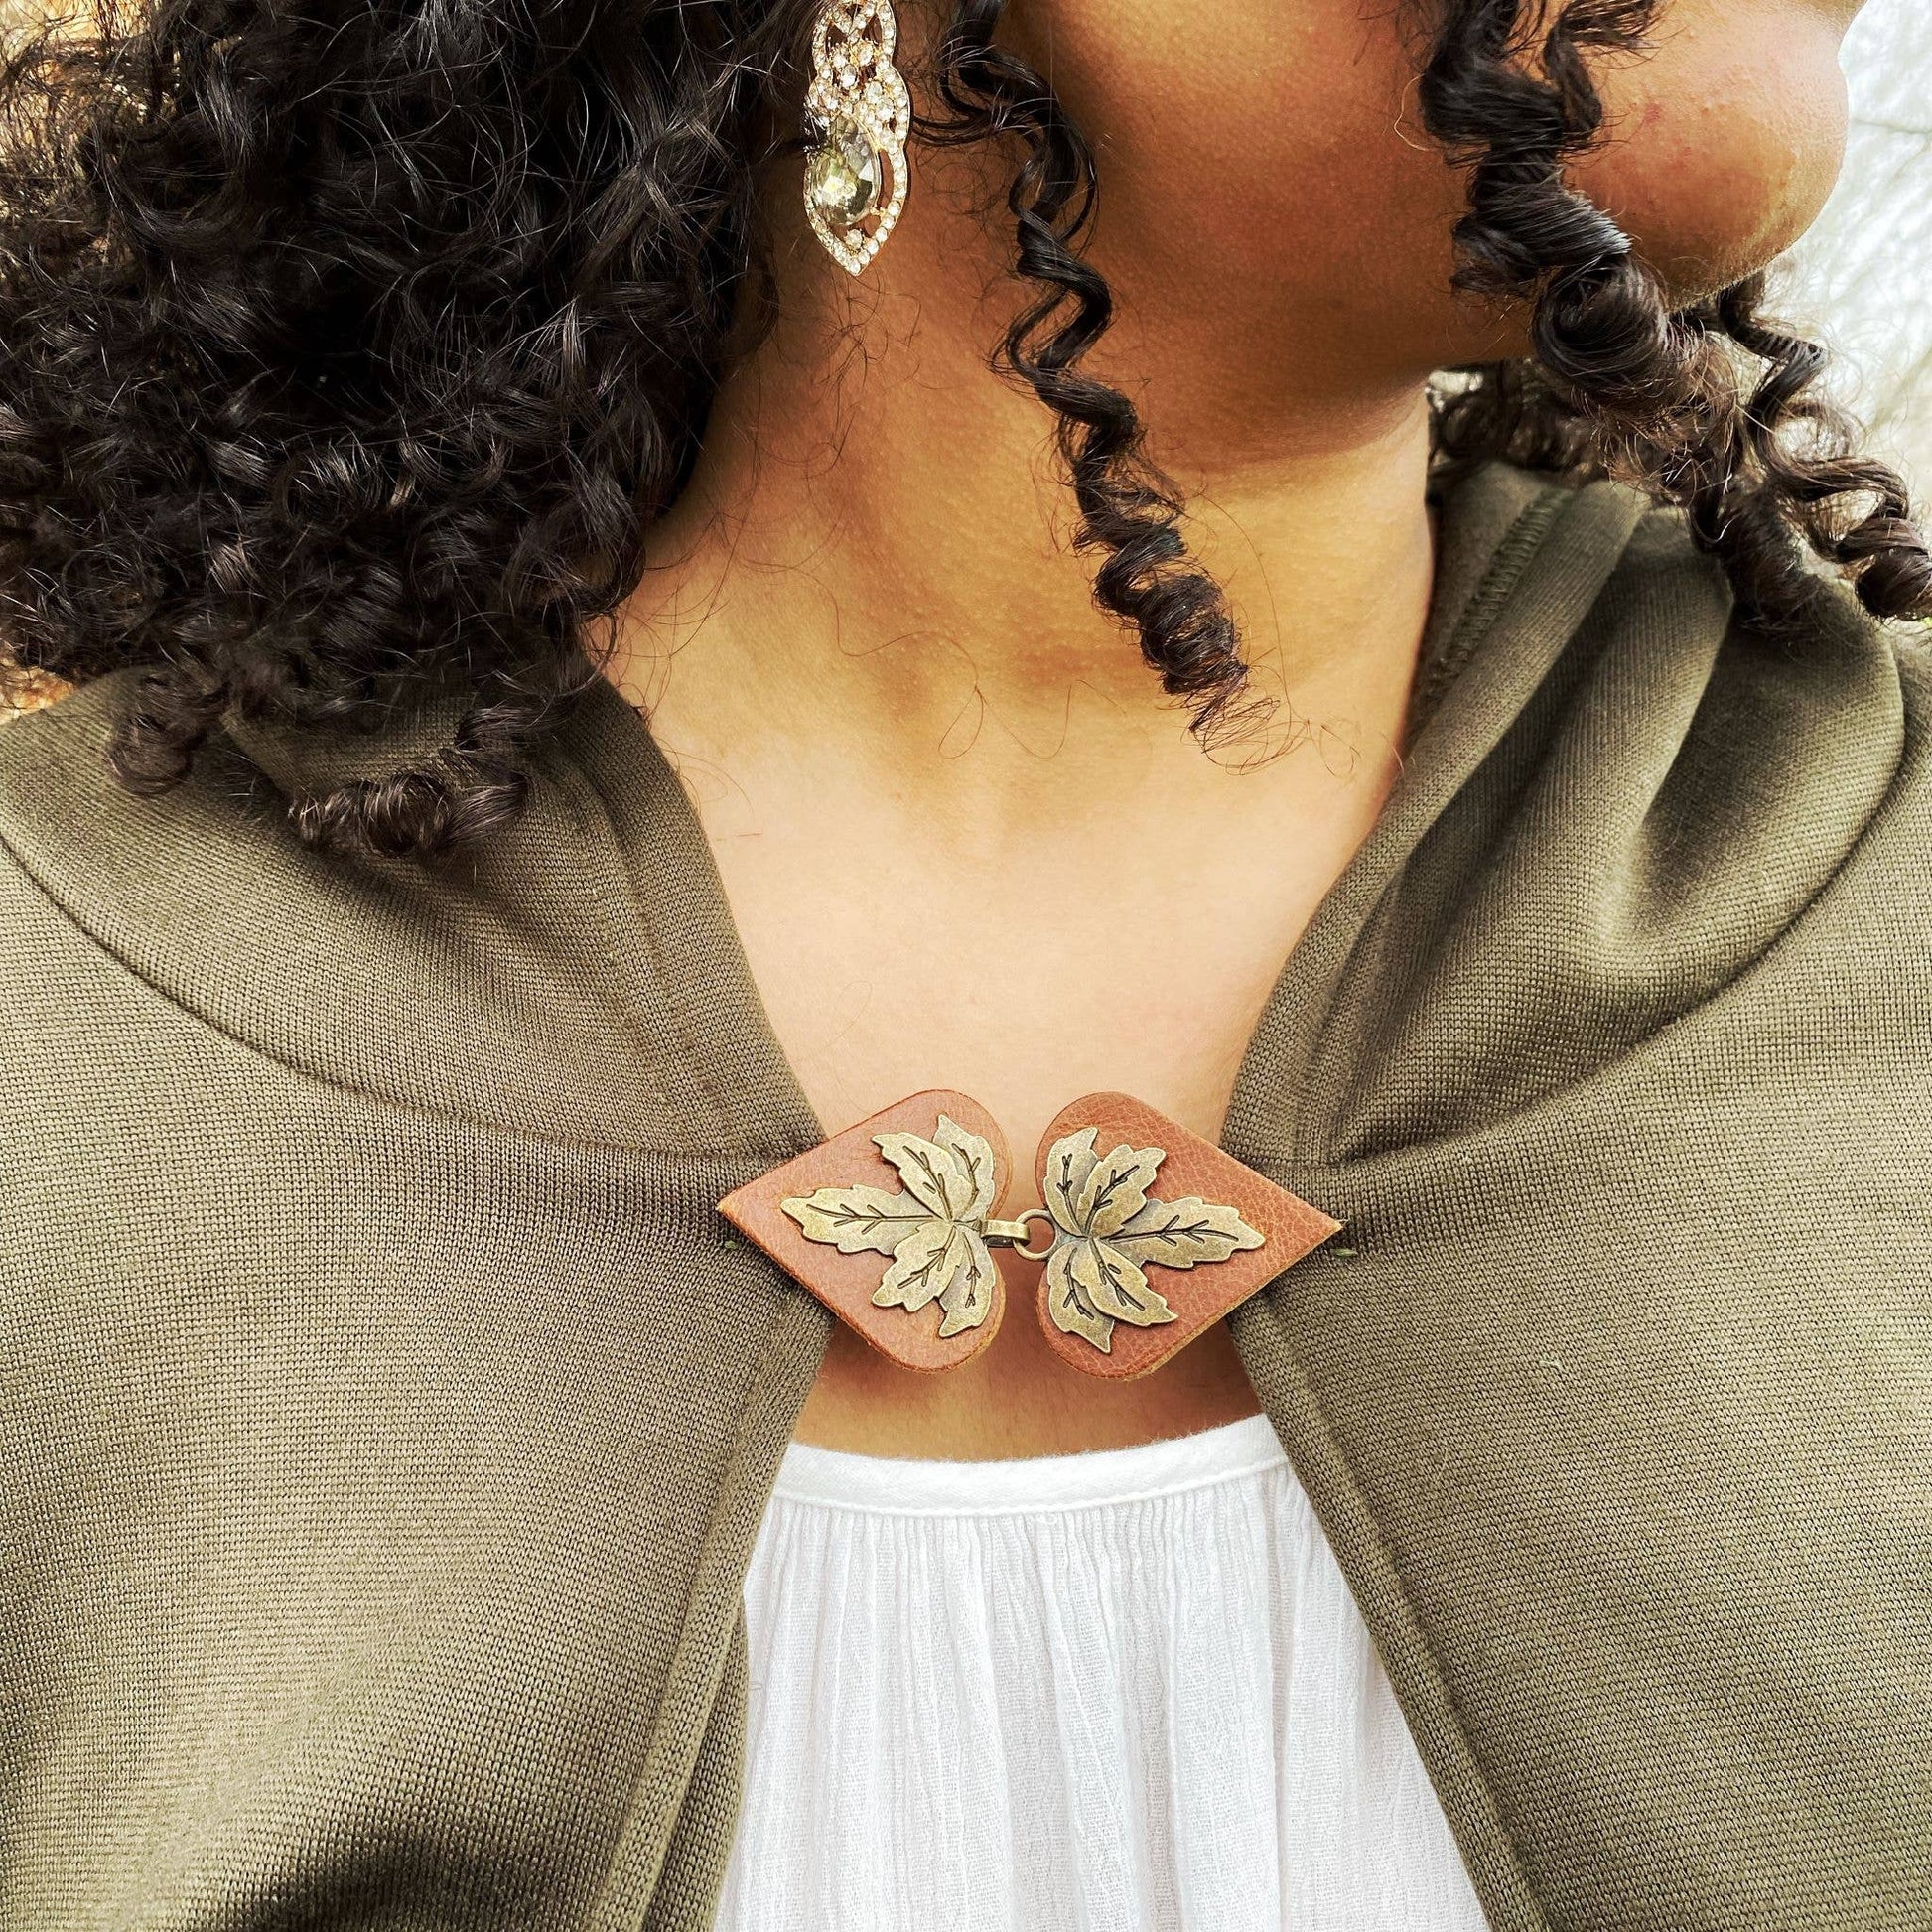 Dress Cinch Clip - Bronze Leaf on Brown Leather  AdornmentsNH – Adornments  & Creative Clothing